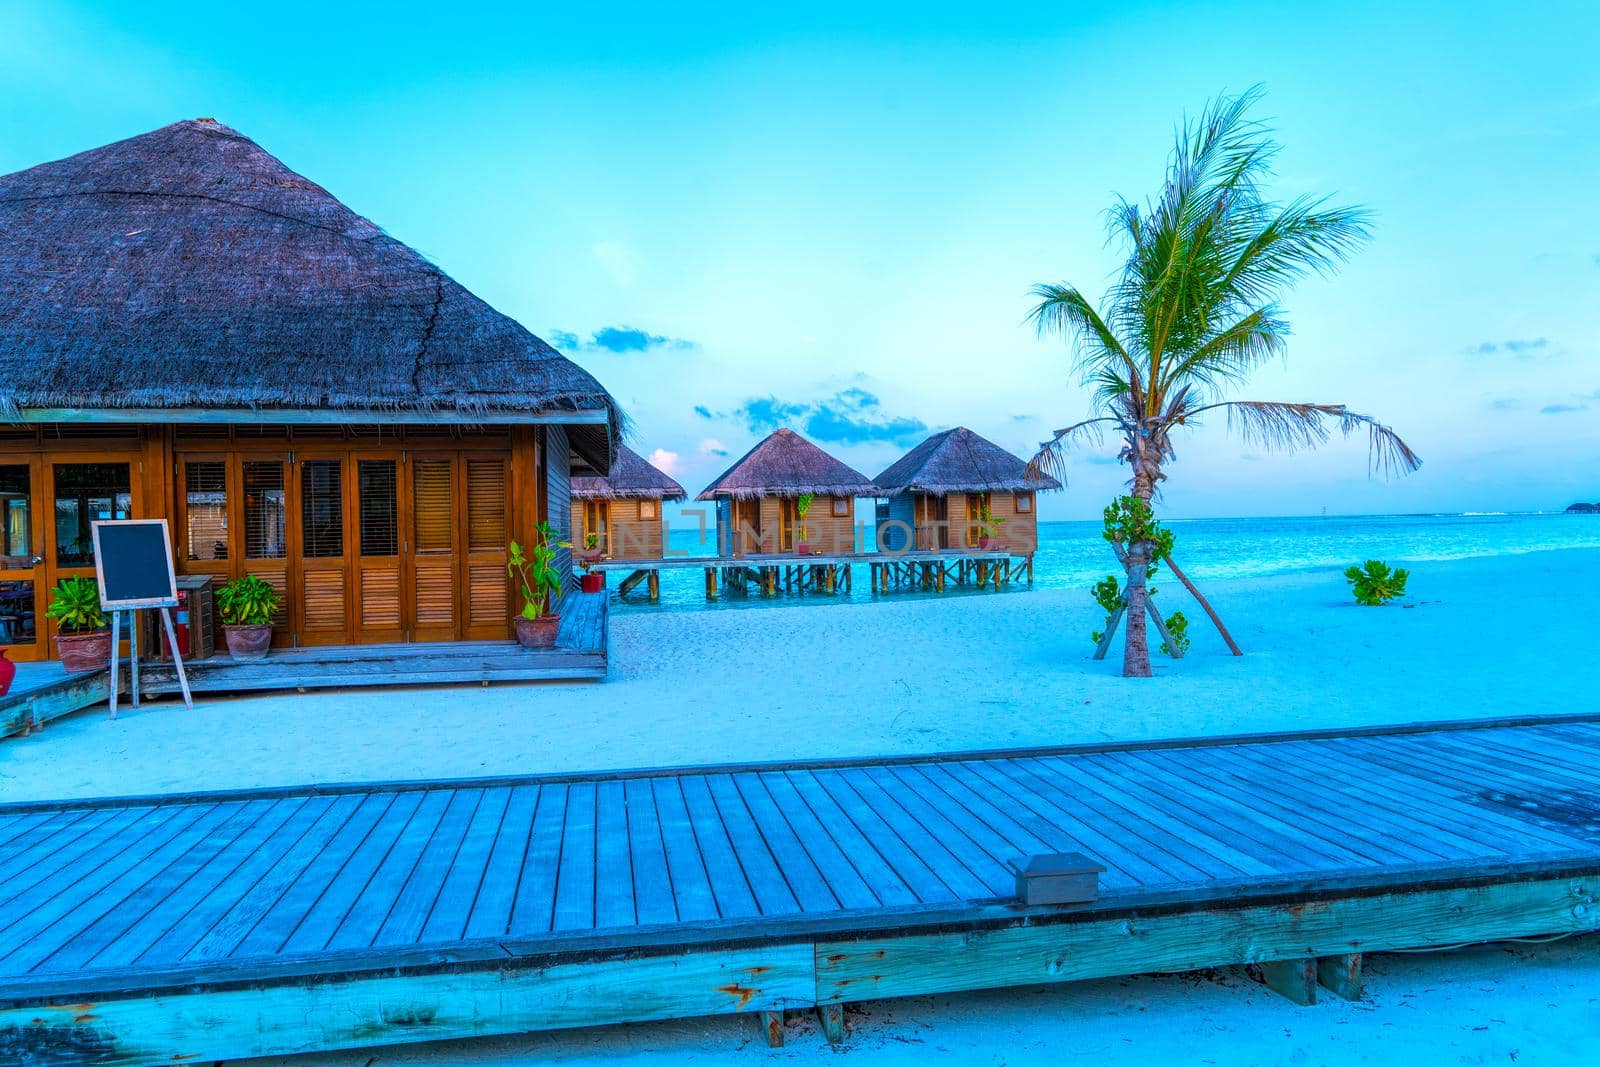 Water Villas,Bungalows and wooden bridge at Tropical beach in the Maldives at summer day.Tourism concept.